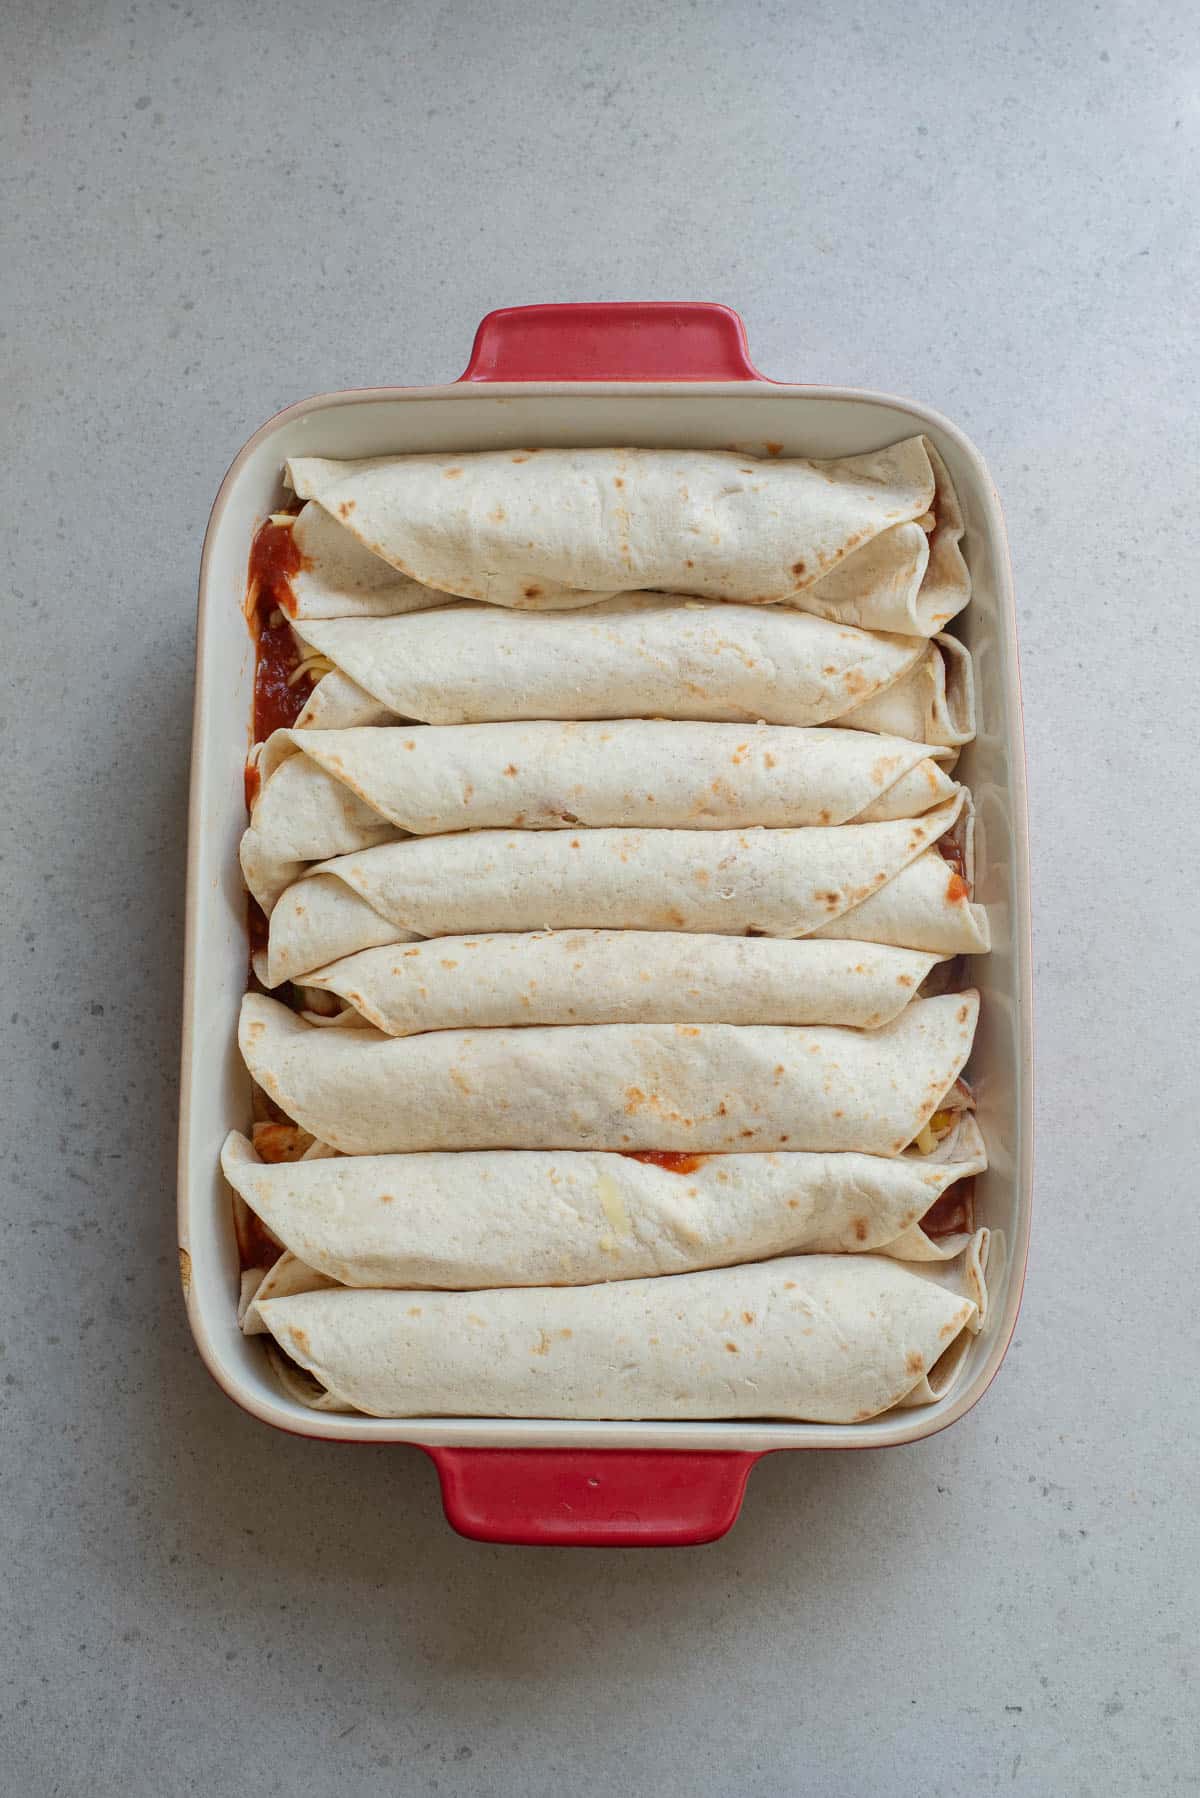 Tortillas filled with chicken and other filling rolled in a baking dish before baking.